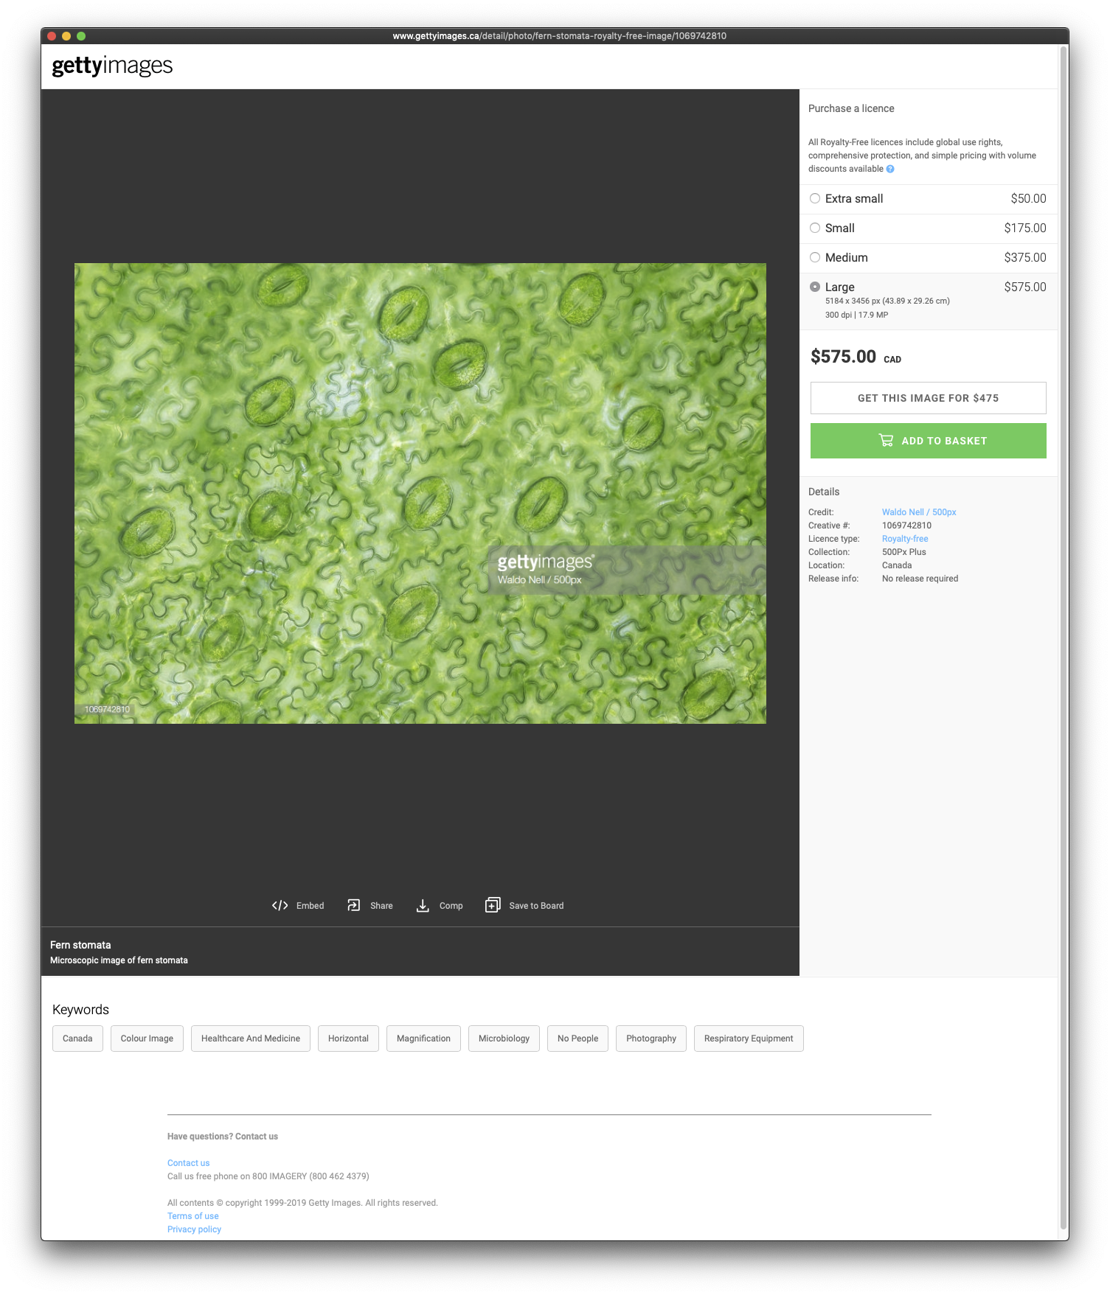 Getty Images - Fern Stomata